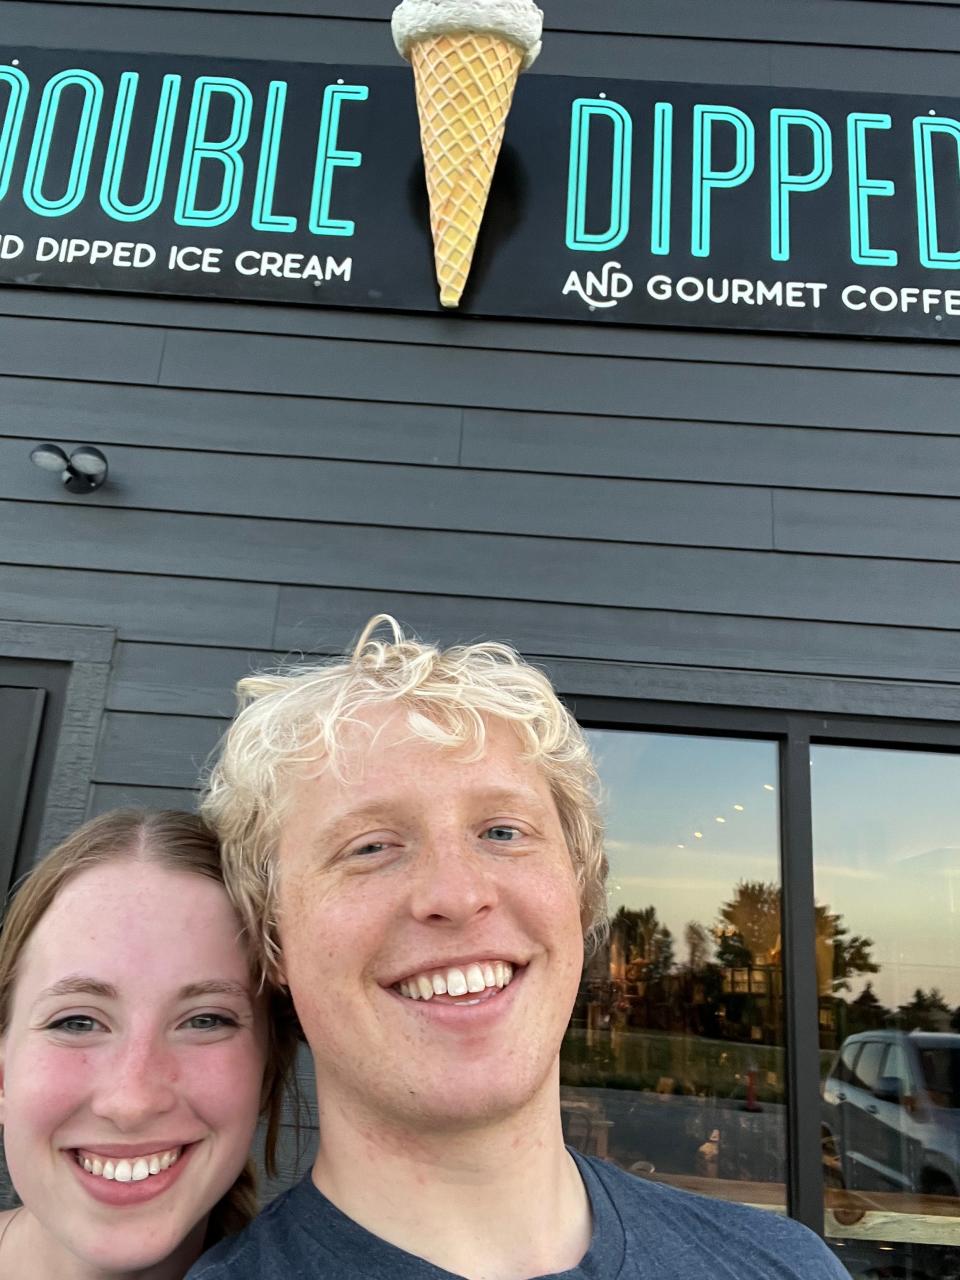 James Douthit and his girlfriend Abby Fowler, both of Ames, pose in front of Double Dipped Ice Cream in Huxley. They both bicycled to the ice cream shop.